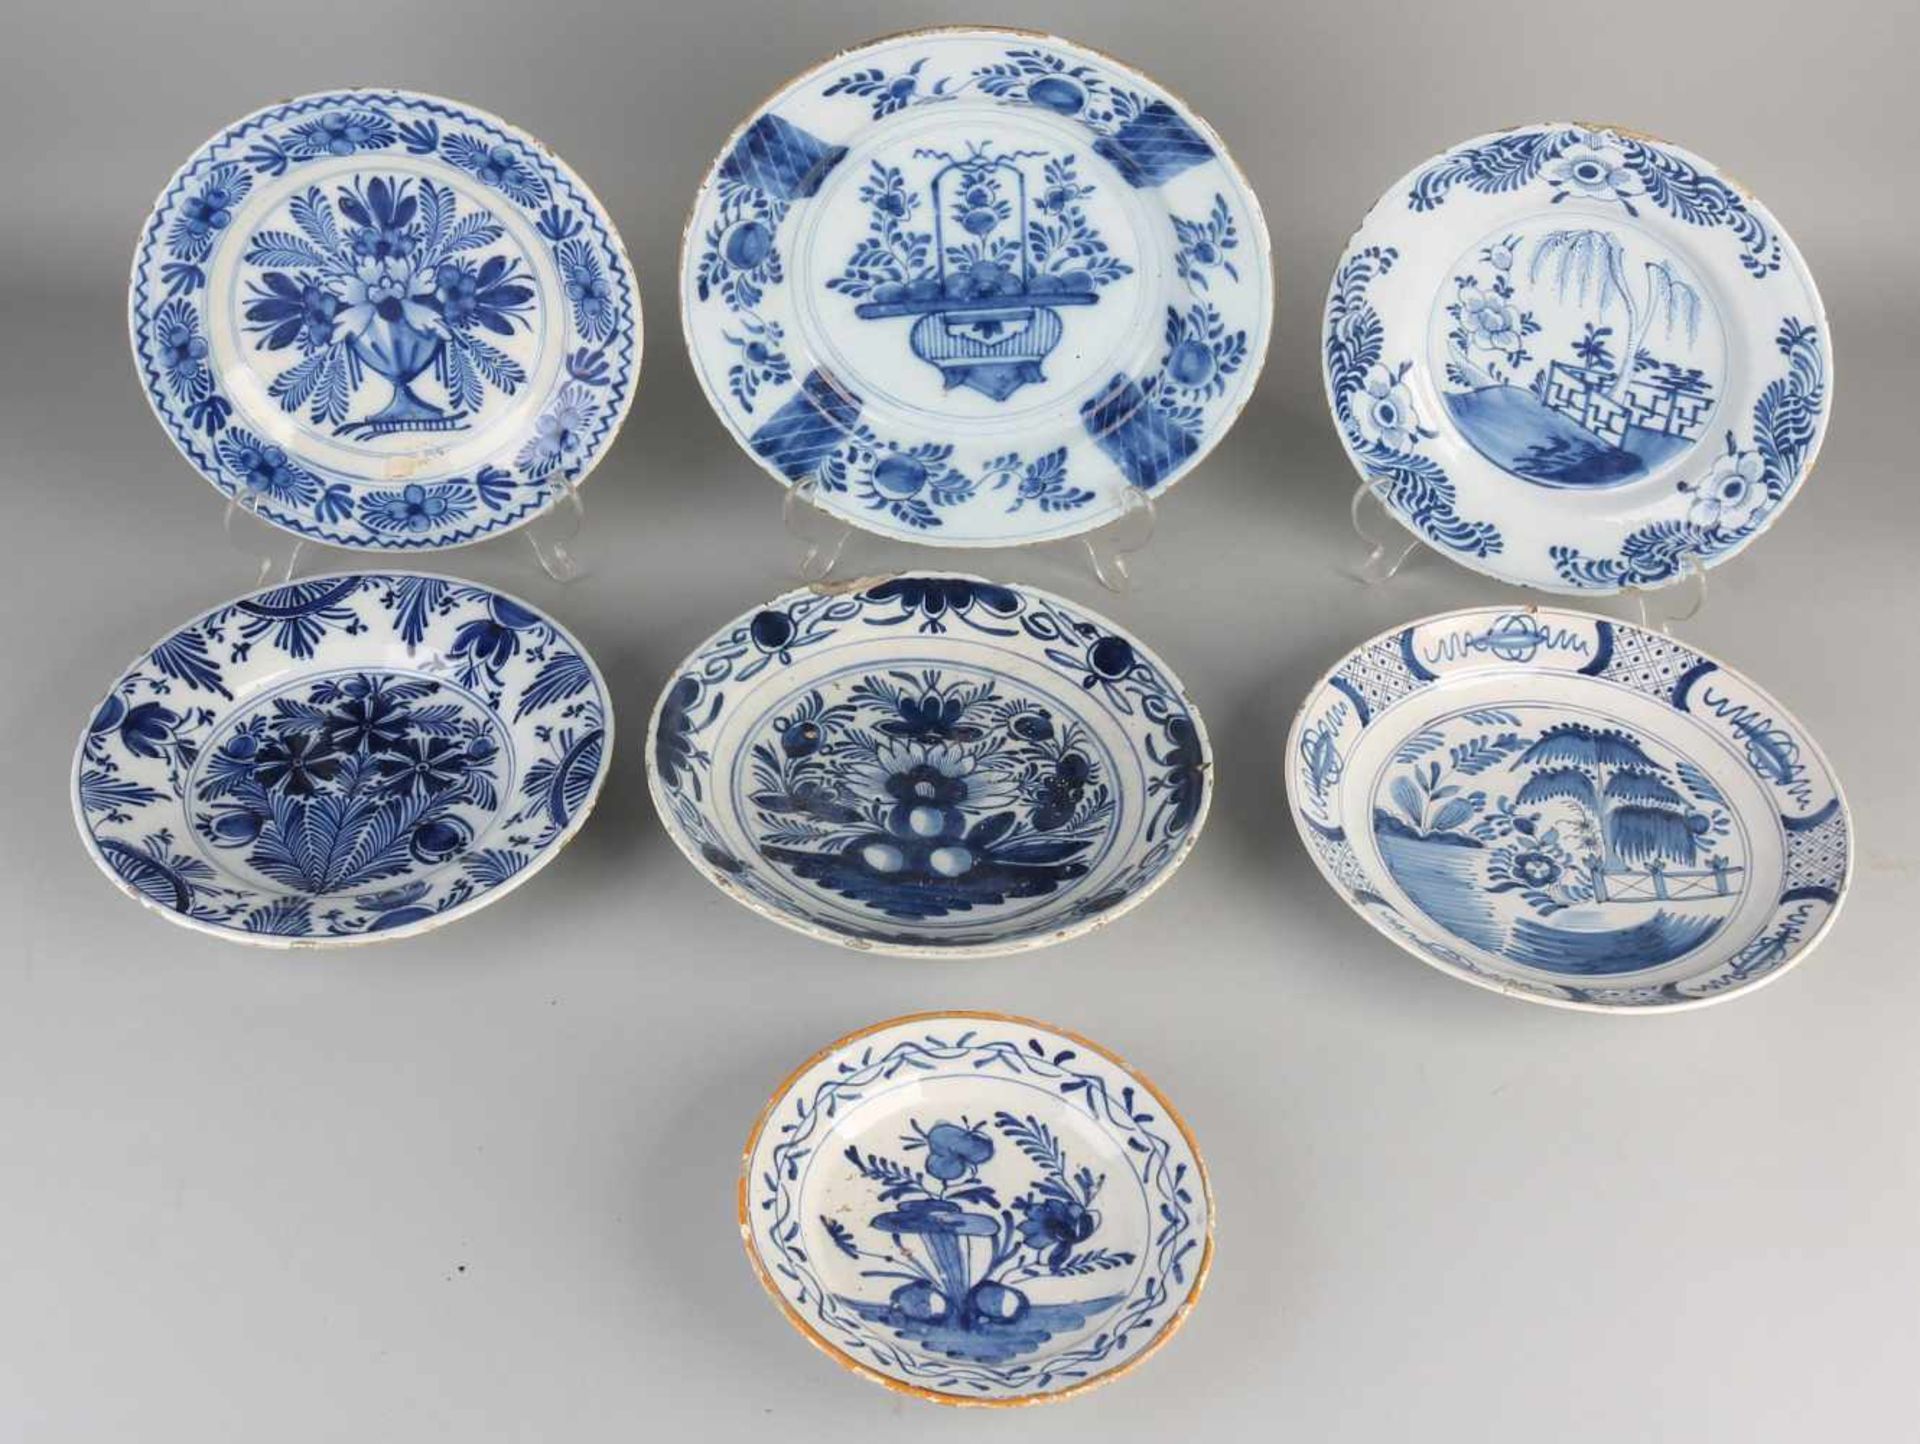 Seven various antique Delft Fayence signs. 18th century. Some edge damage. Size: ø 17-26 cm. In good